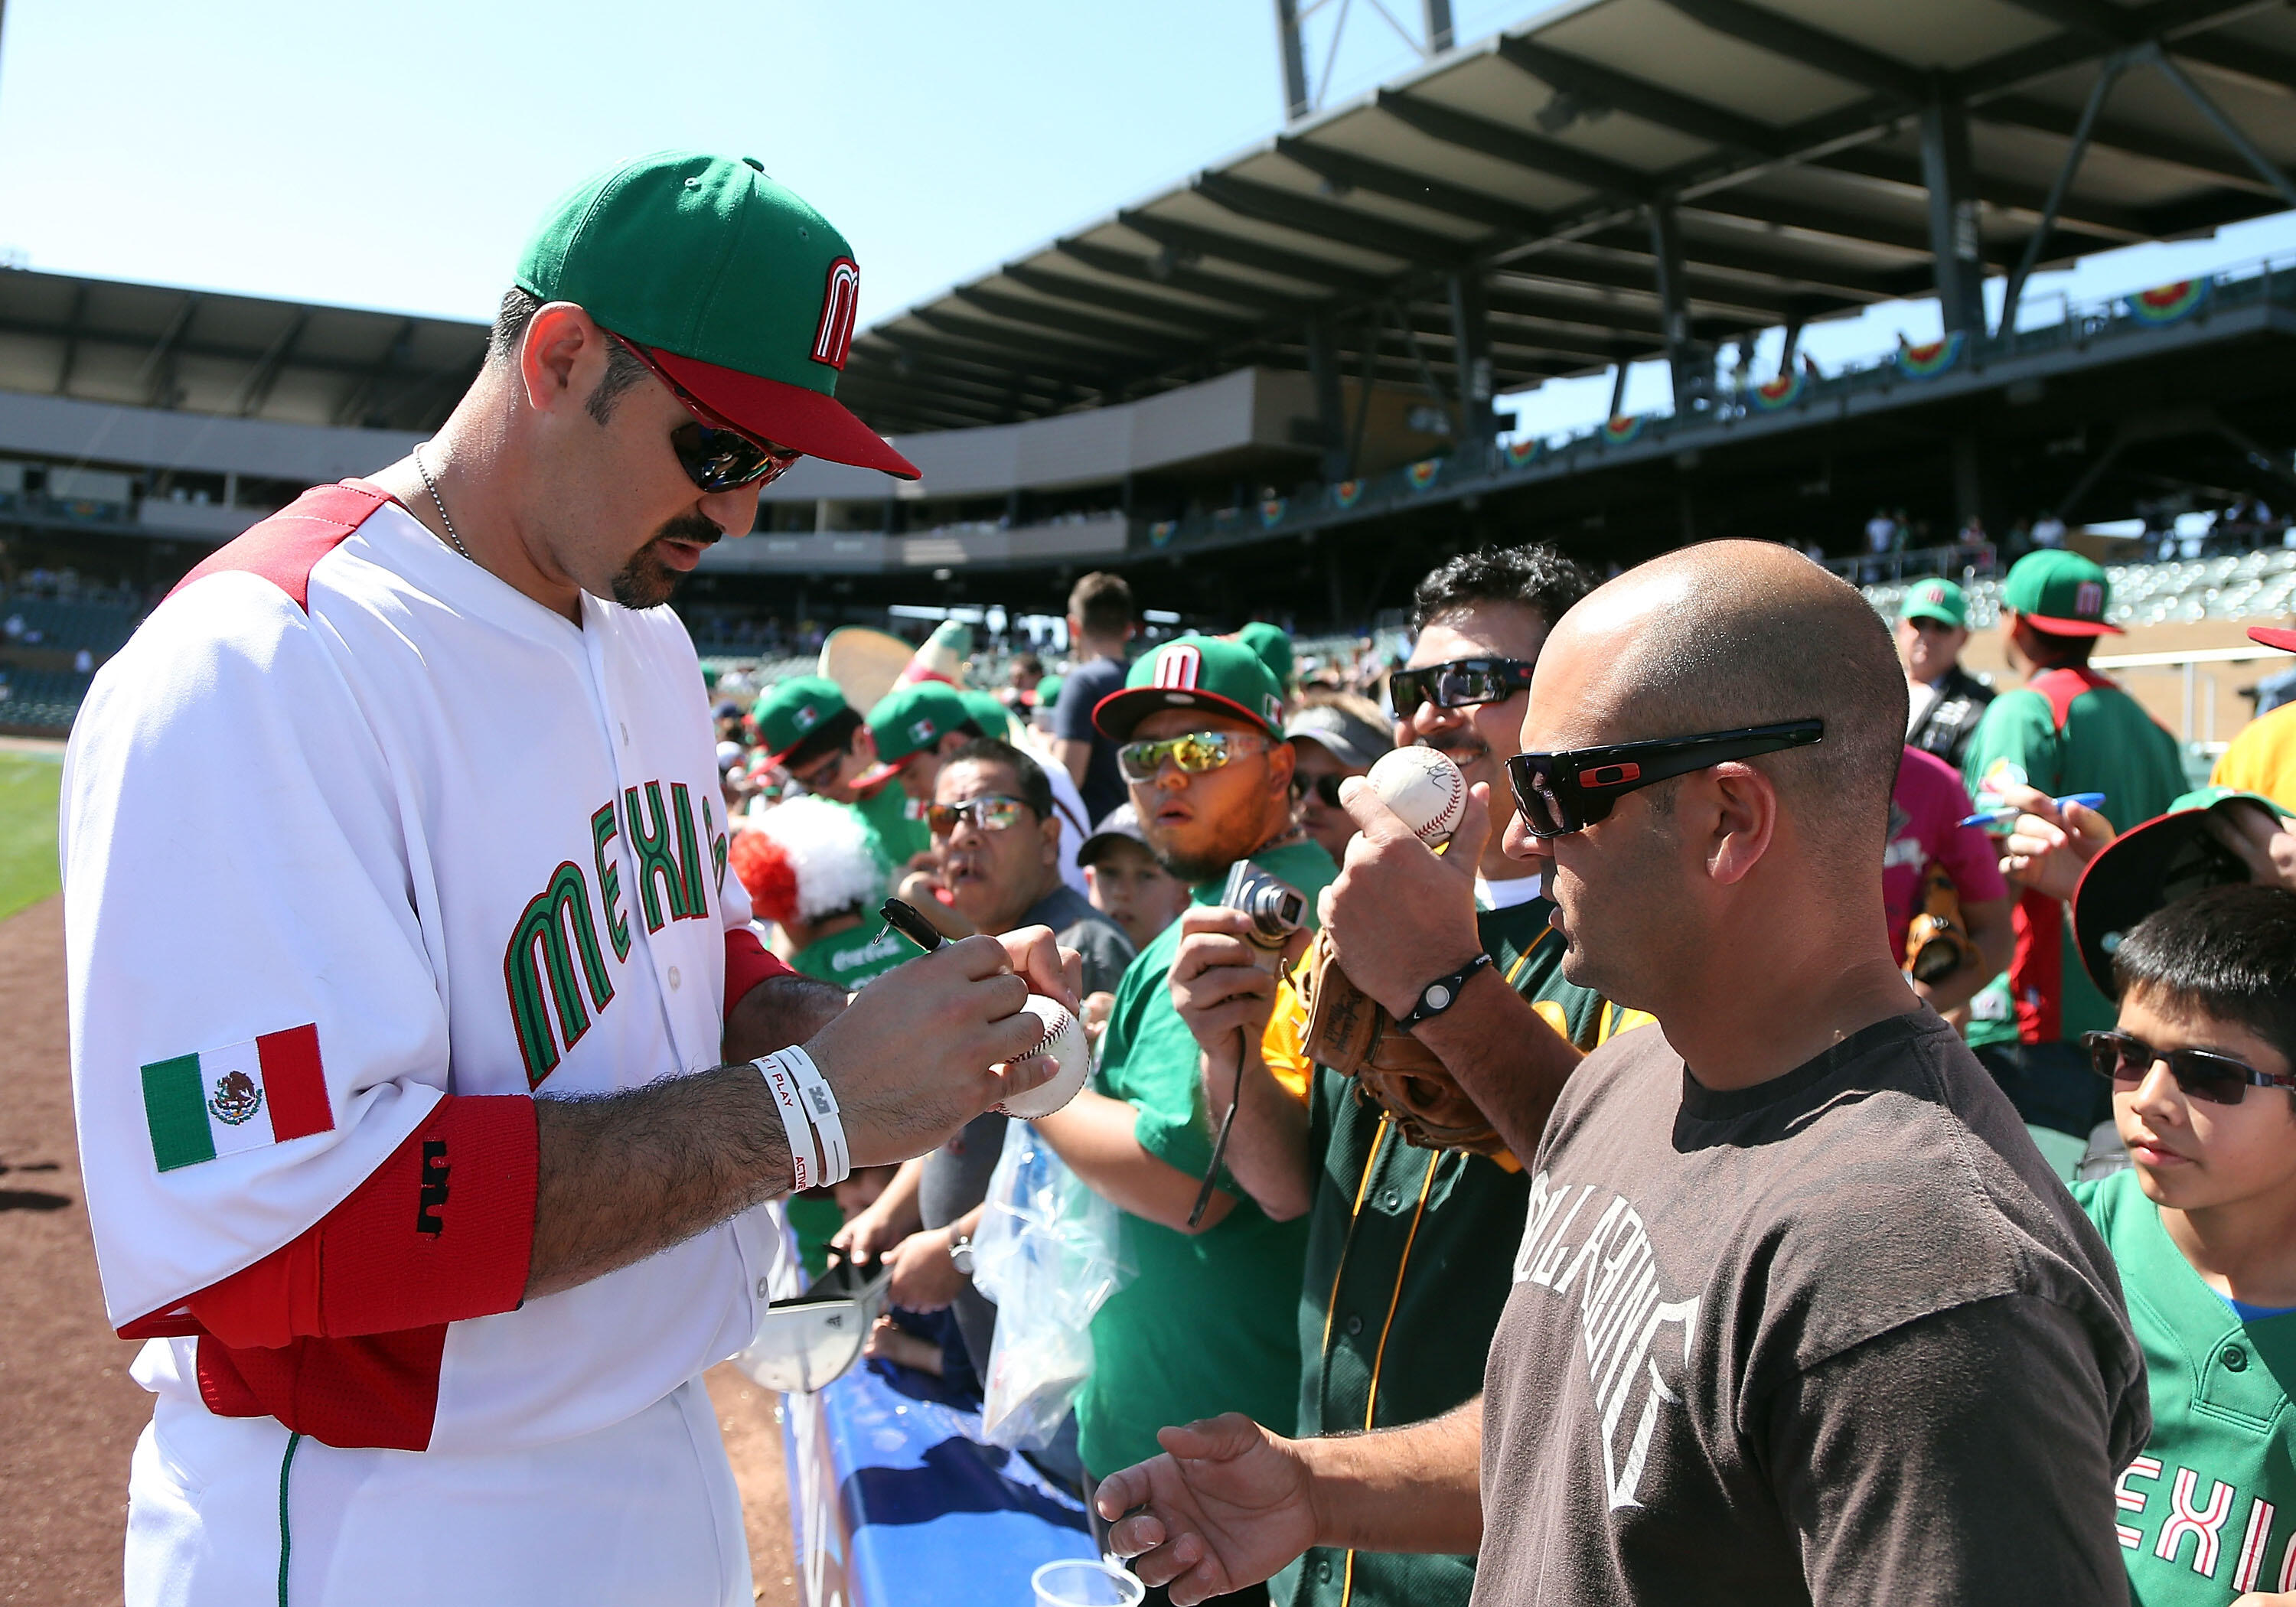 SCOTTSDALE, AZ - MARCH 07:  Adrian Gonzalez #23 of Mexico signs autographs before the World Baseball Classic First Round Group D game against Italy at Salt River Fields at Talking Stick on March 7, 2013 in Scottsdale, Arizona.   Italy defeated Mexico 6-5.